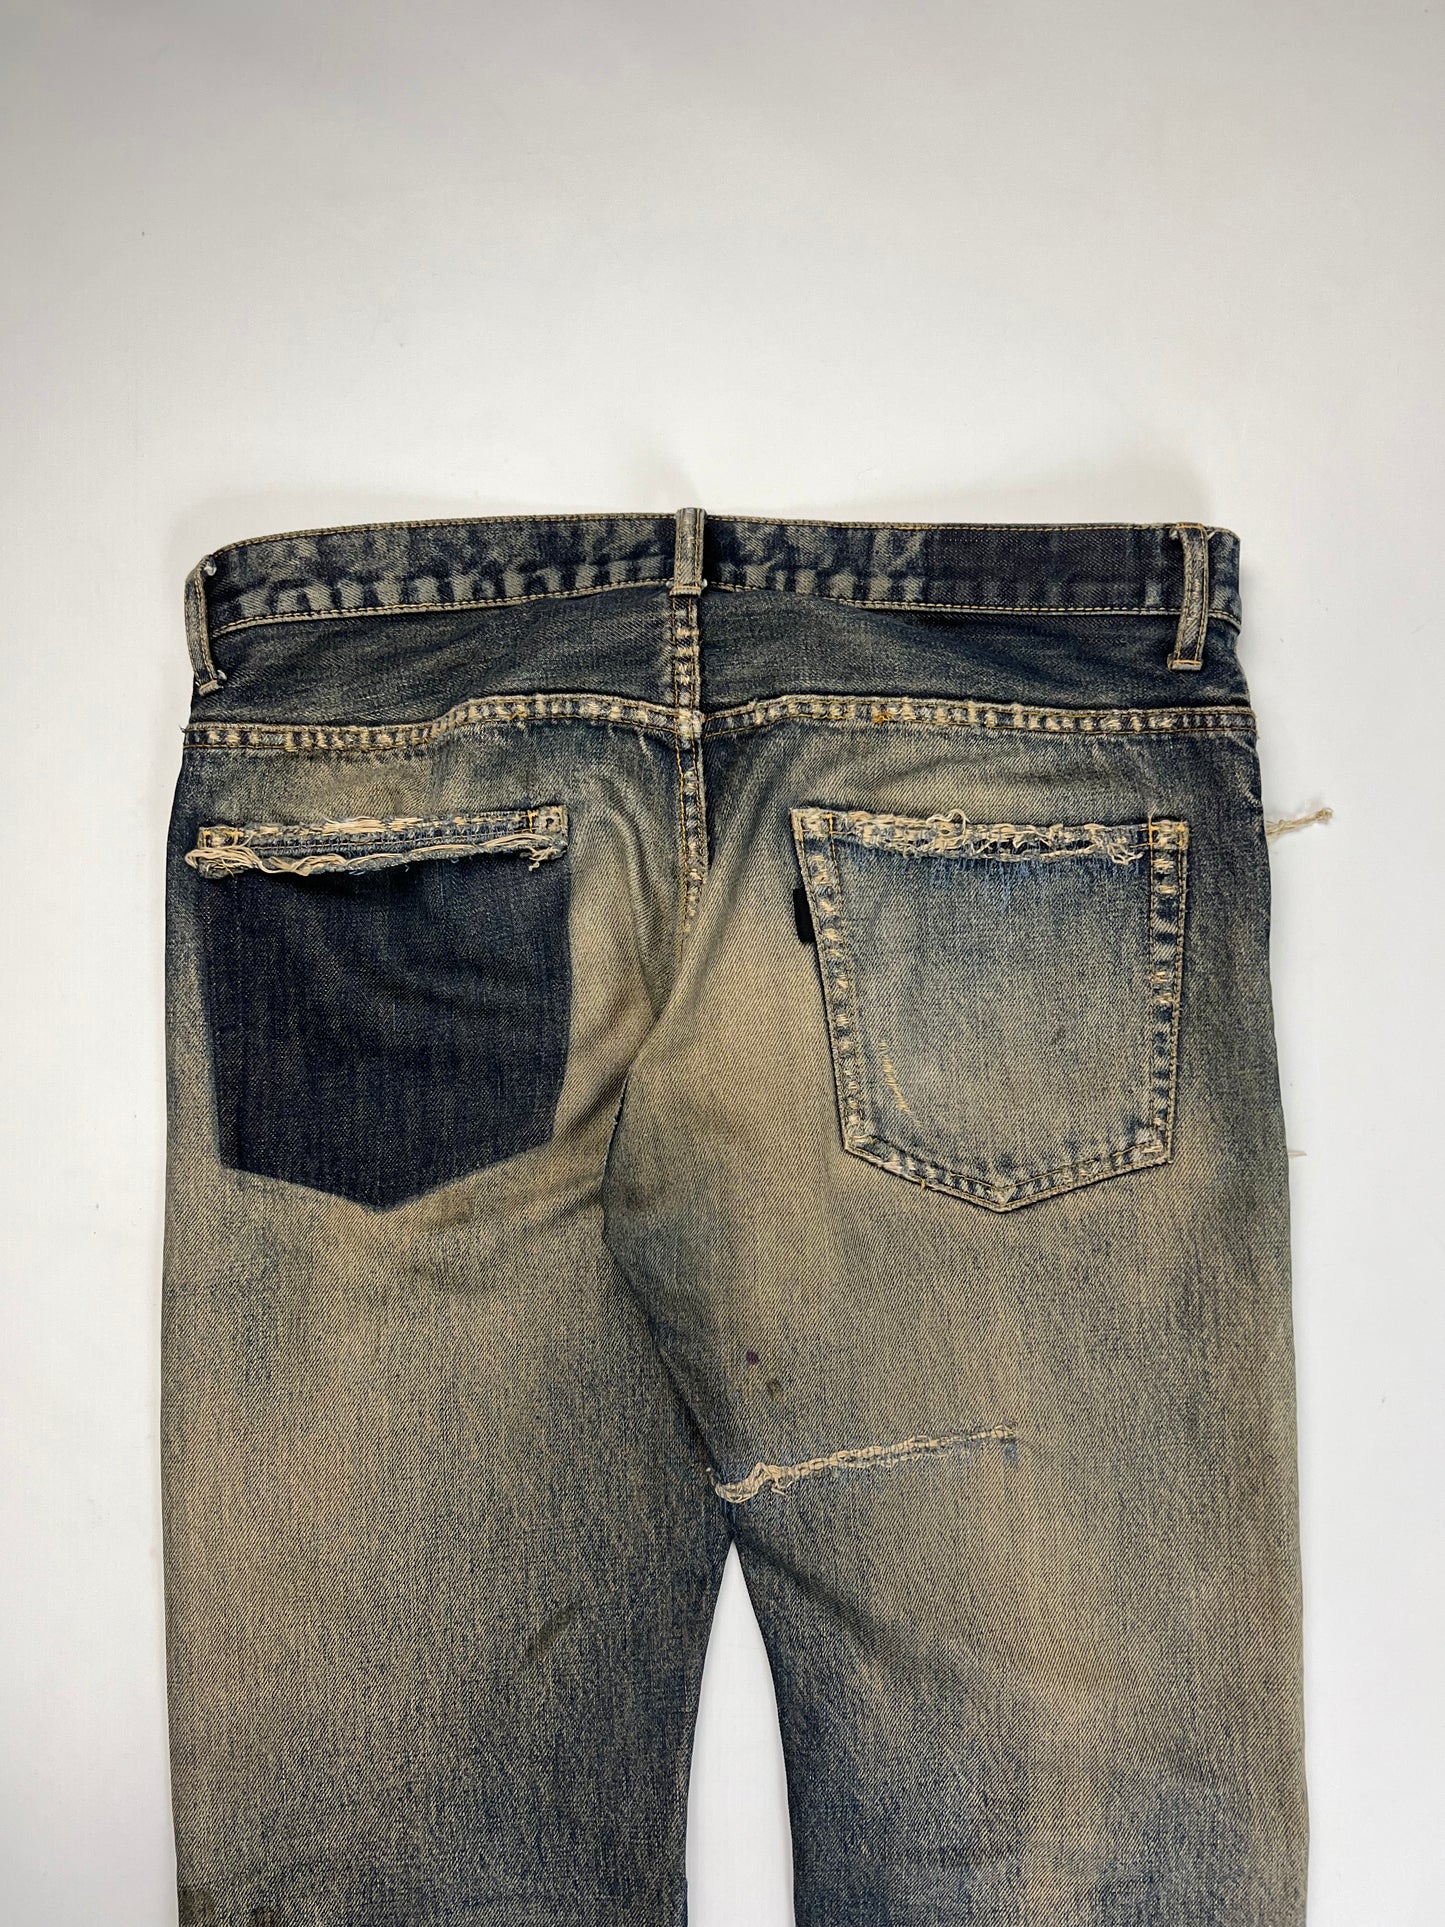 Undercover 68 blue yarn distressed Jeans SZ:4